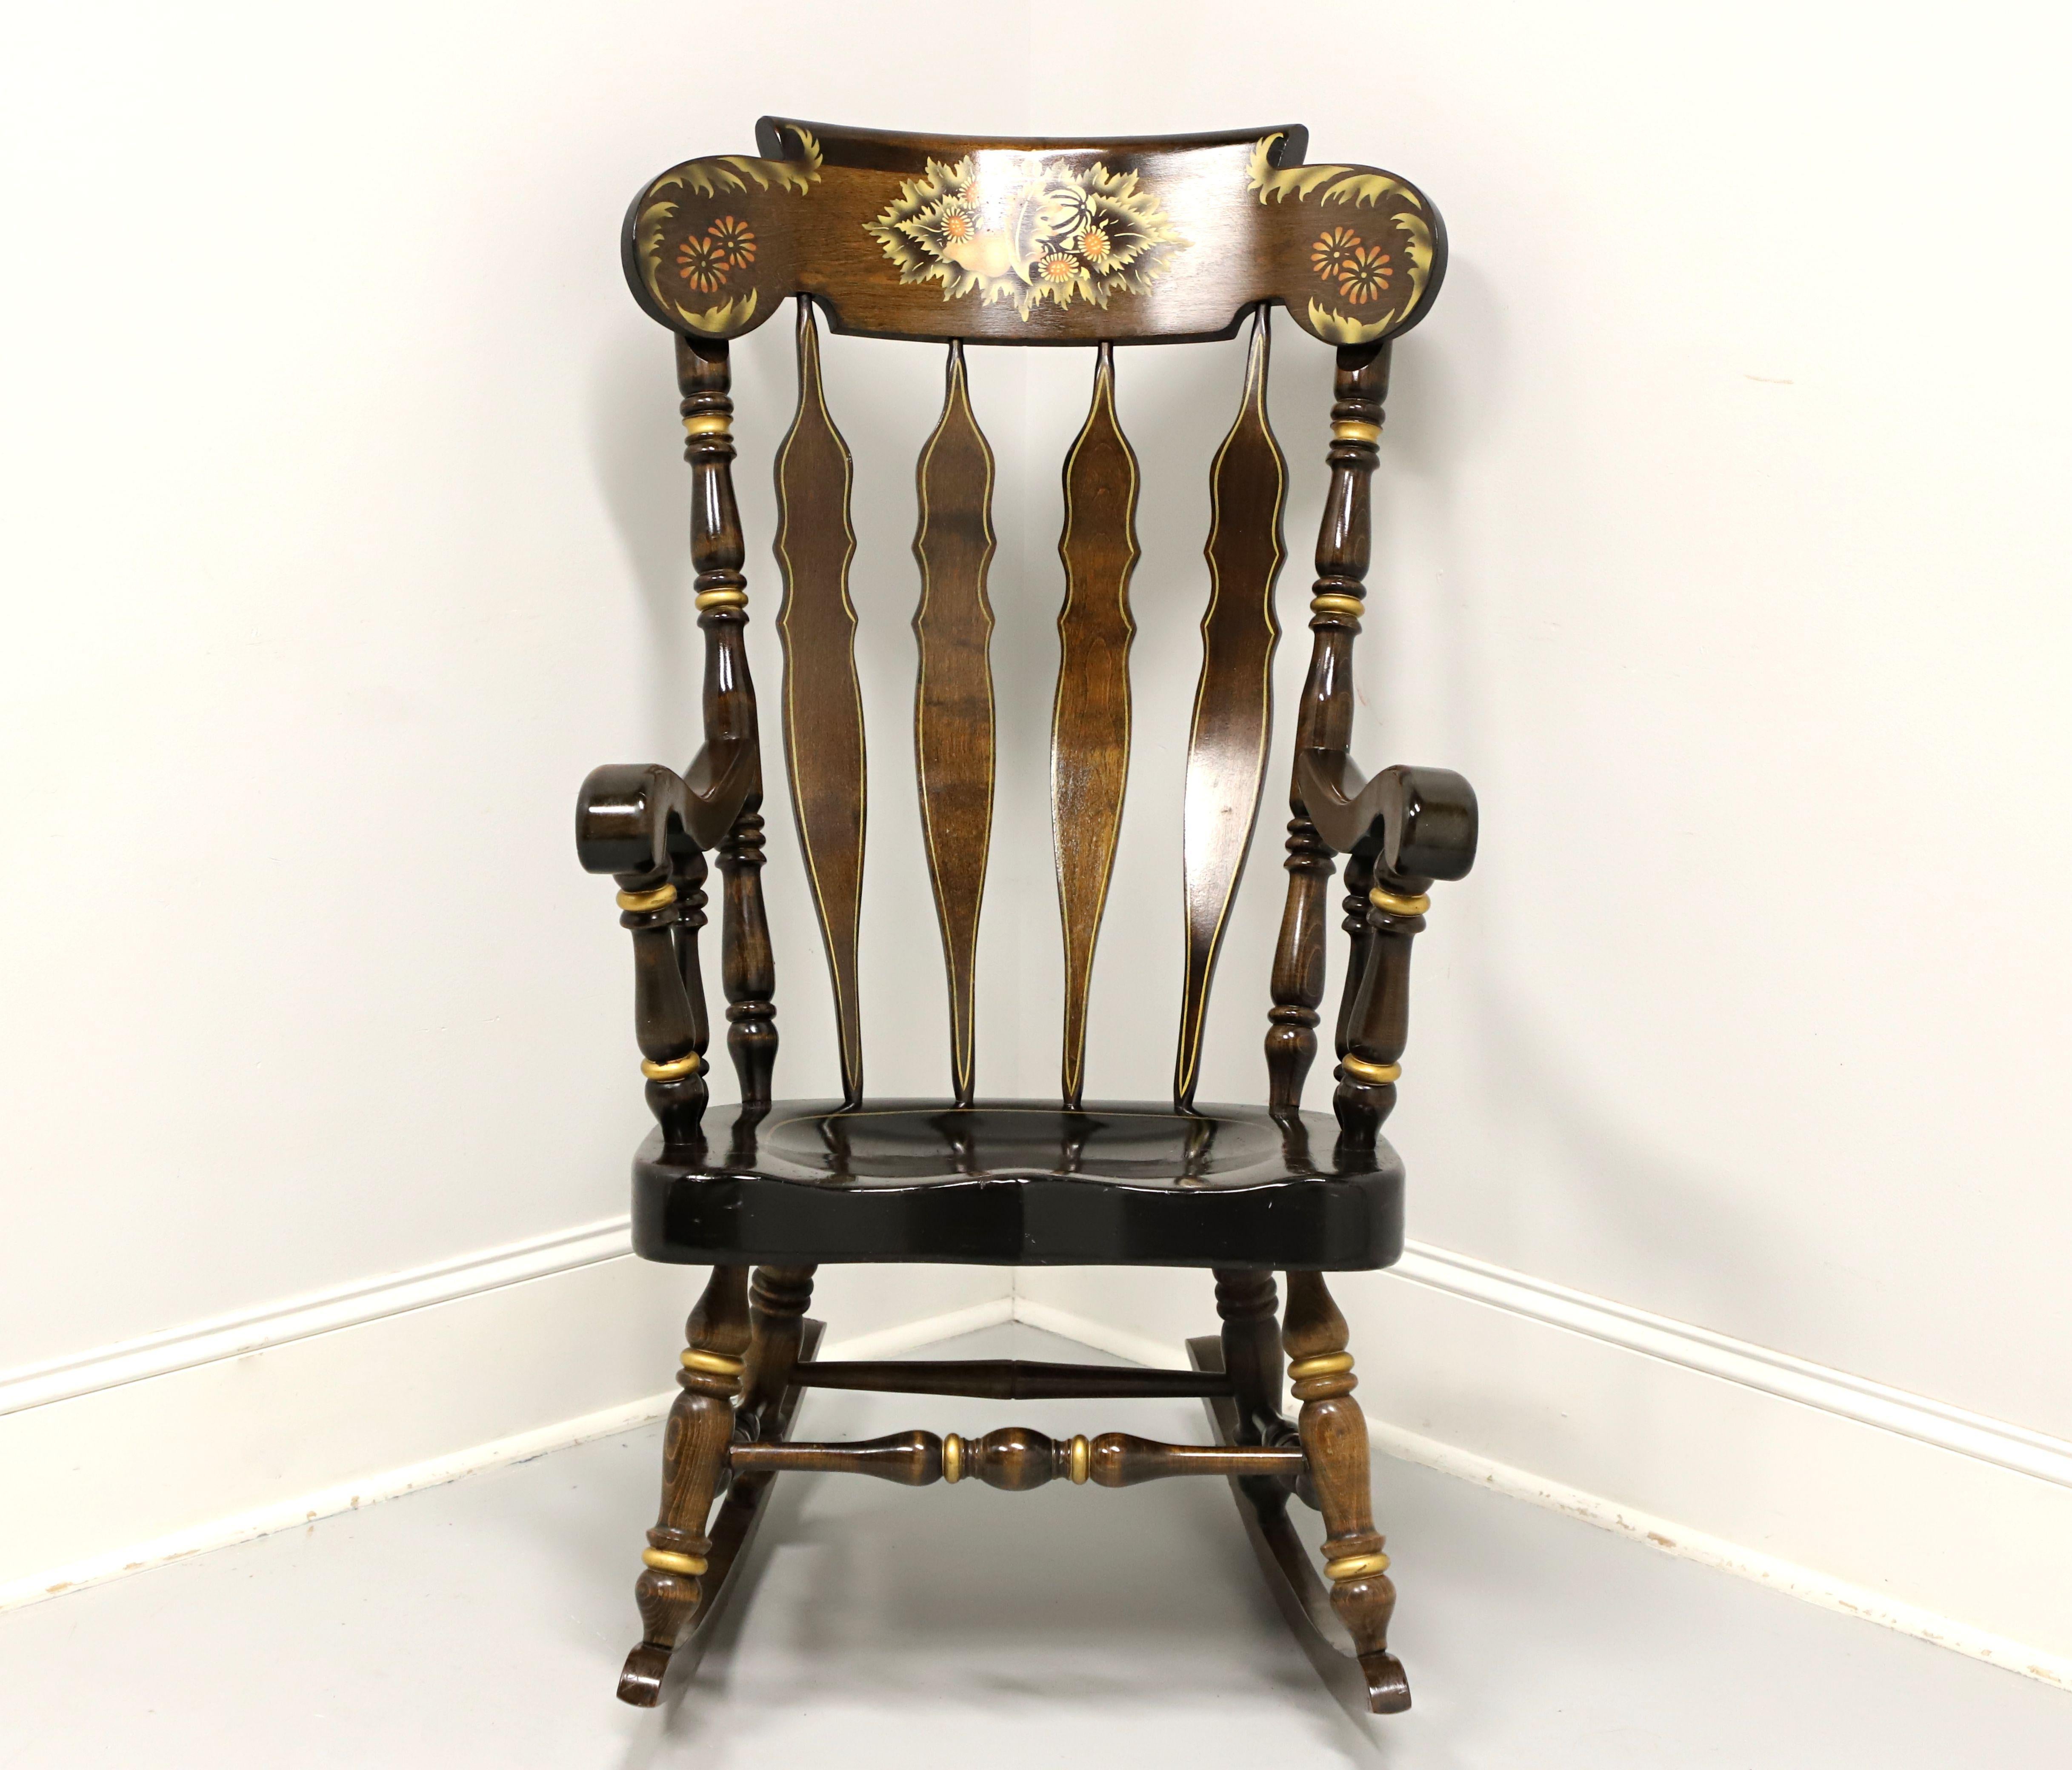 A stenciled Colonial Windsor style rocking chair by Nichols & Stone, possibly their Sugarbush. Select northern hardwoods with a pine seat, floral motif stenciling to carved crestrail, gold painted accents, decoratively carved backrest spindles,